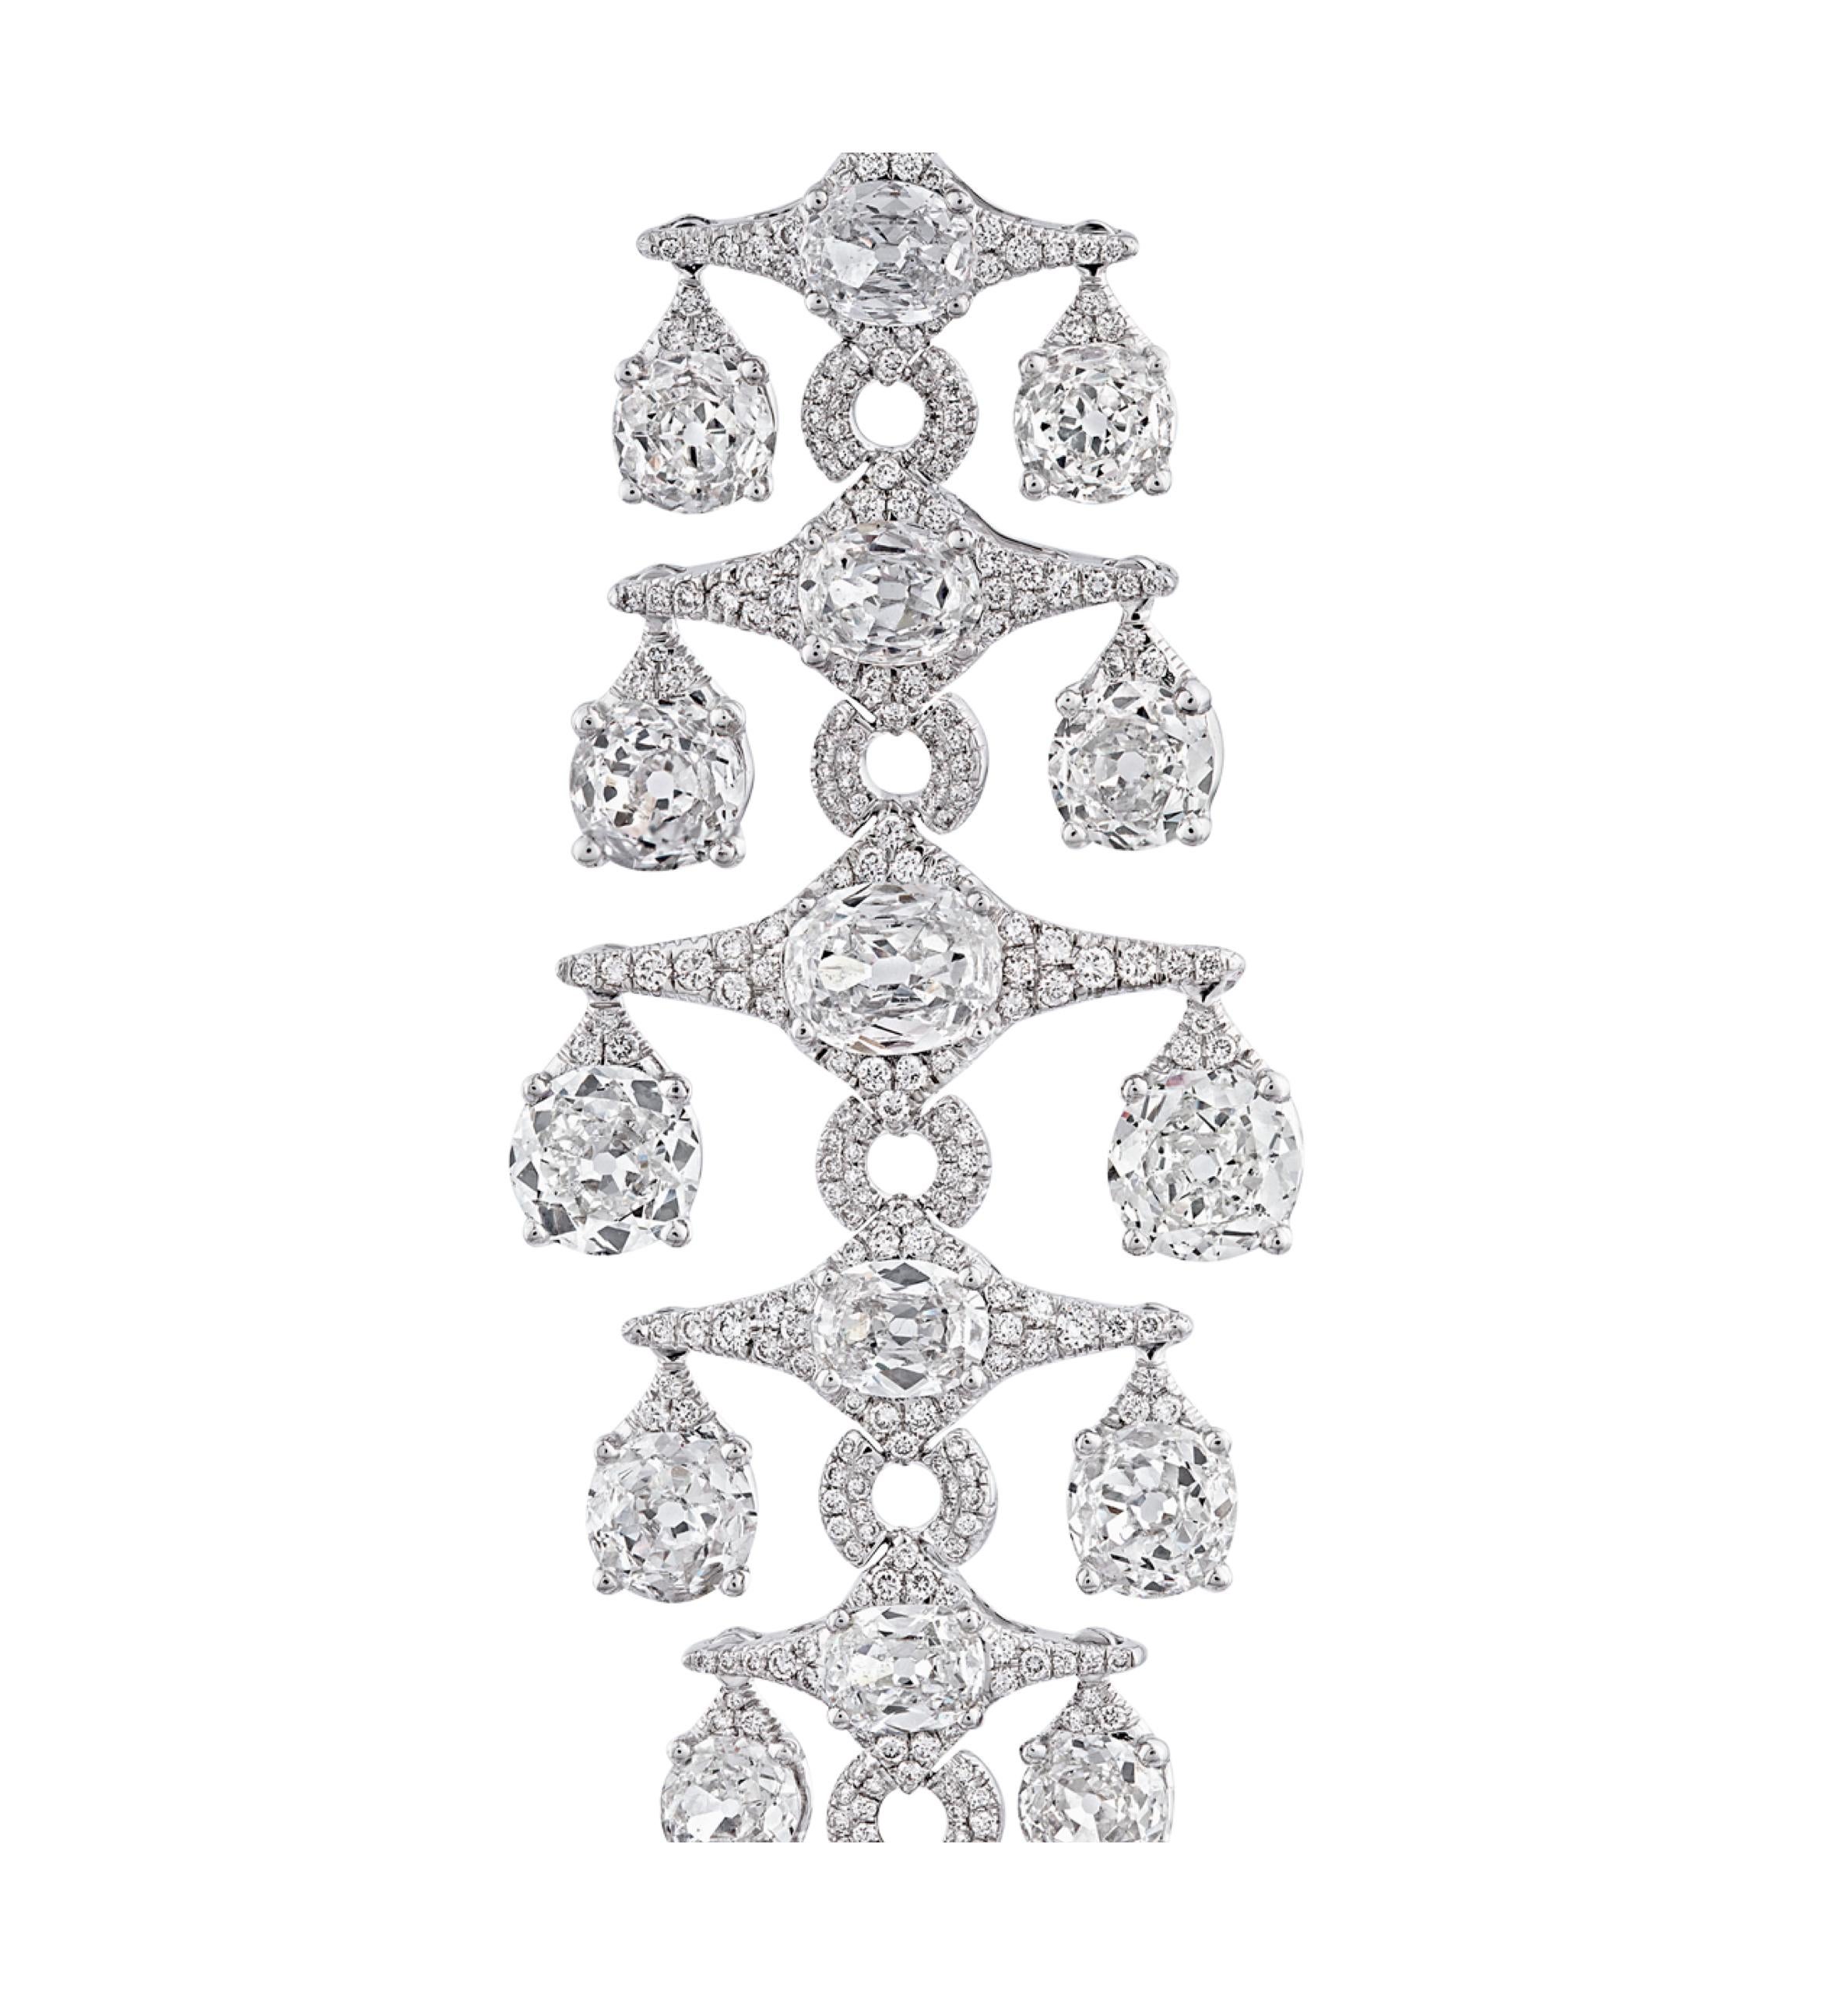 Rarever 18k White Gold 21.6ct Old Mine Cut Diamond Chandelier Statement Earrings In New Condition For Sale In London, GB